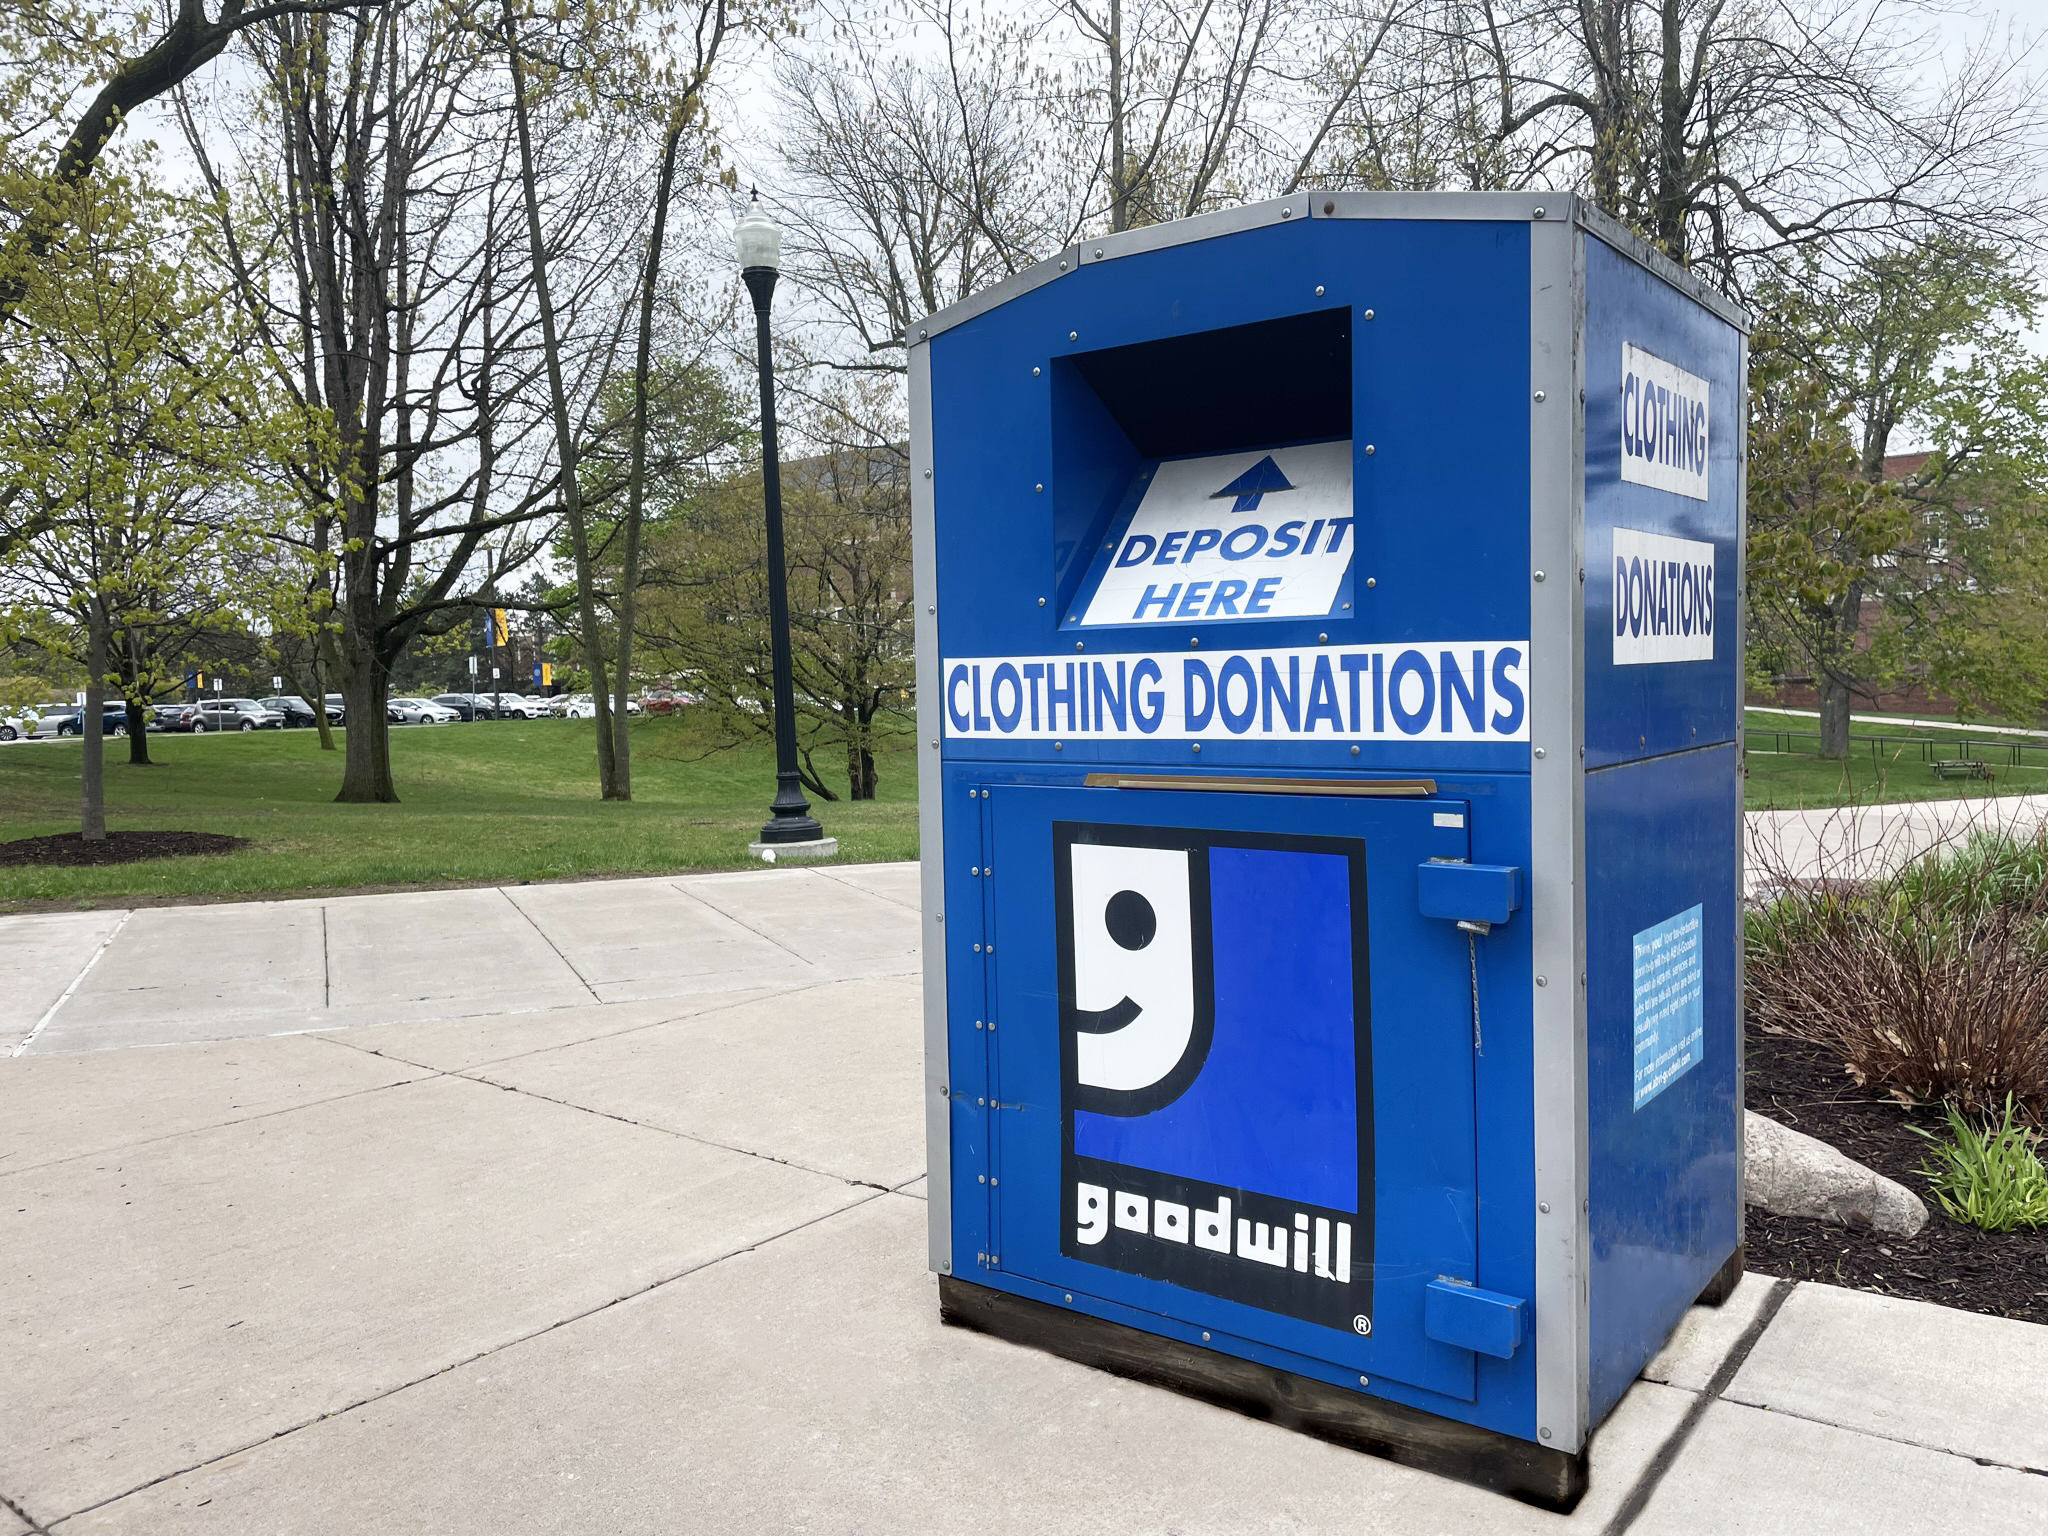 A Goodwill clothing donation box located on the University of Rochester campus